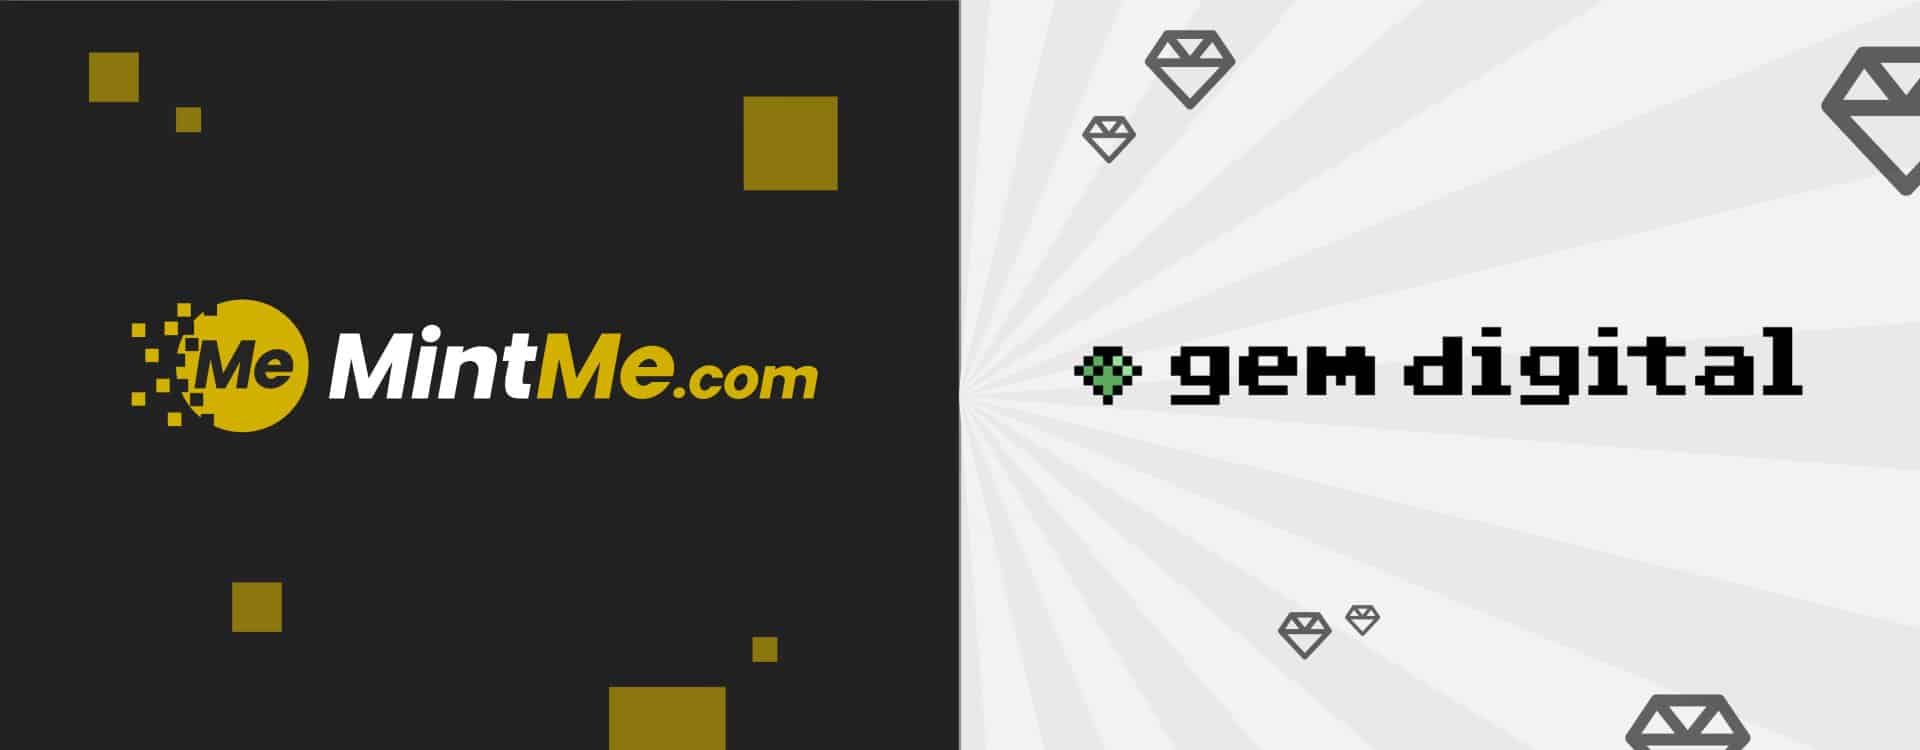 MintMe.com Coin Secures $25M Investment Commitment from GEM Digital Limited